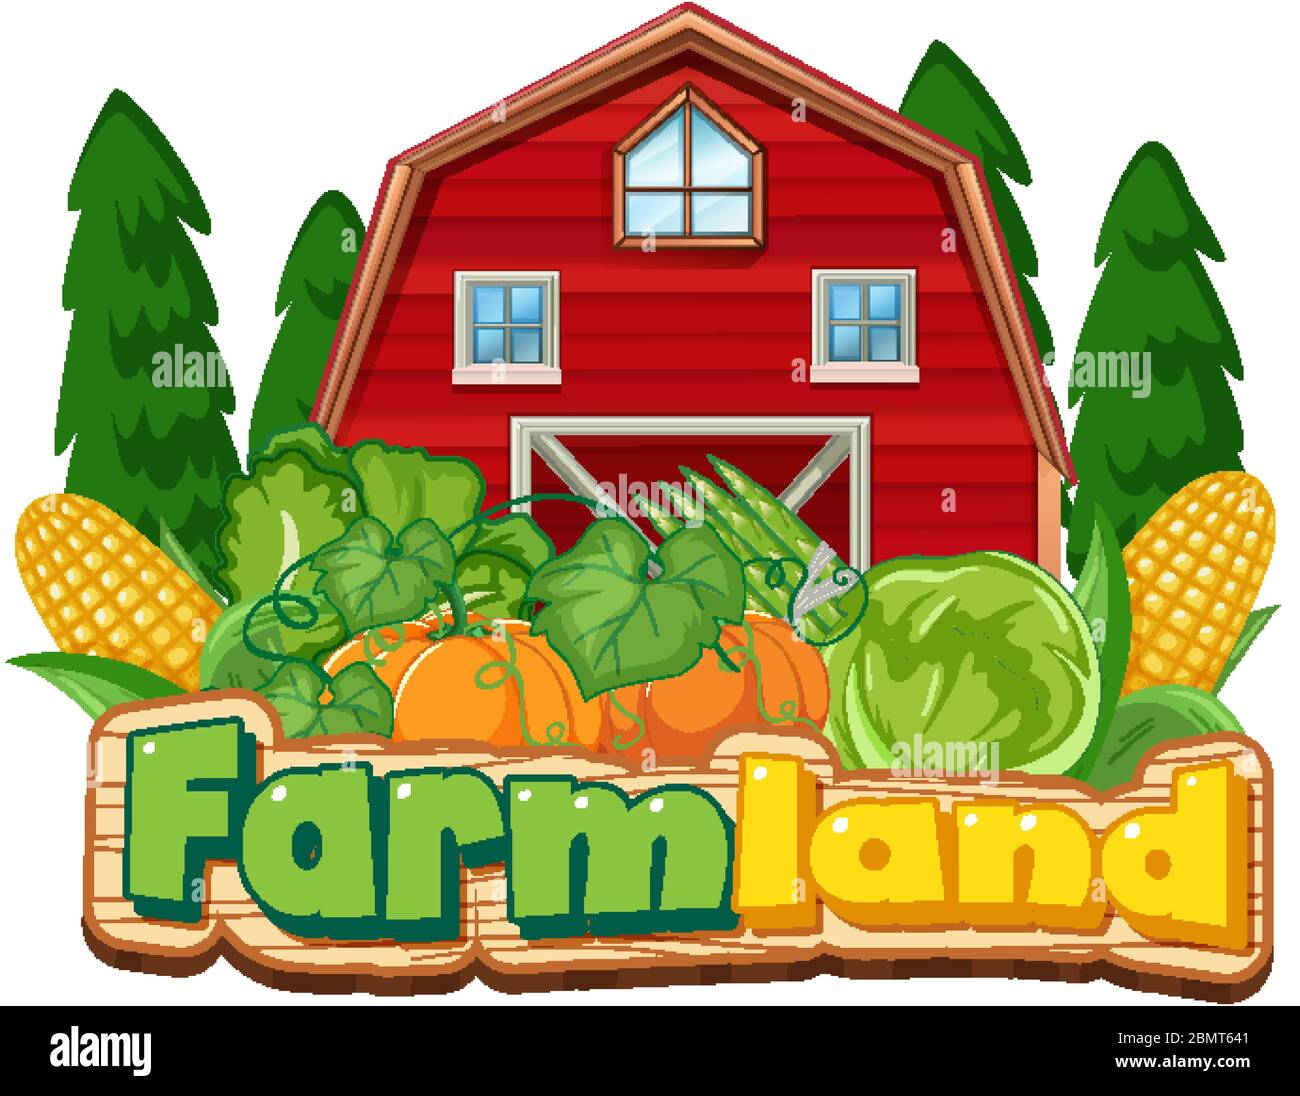 Farmland sign template with red barn and vegetables illustration Stock Vector